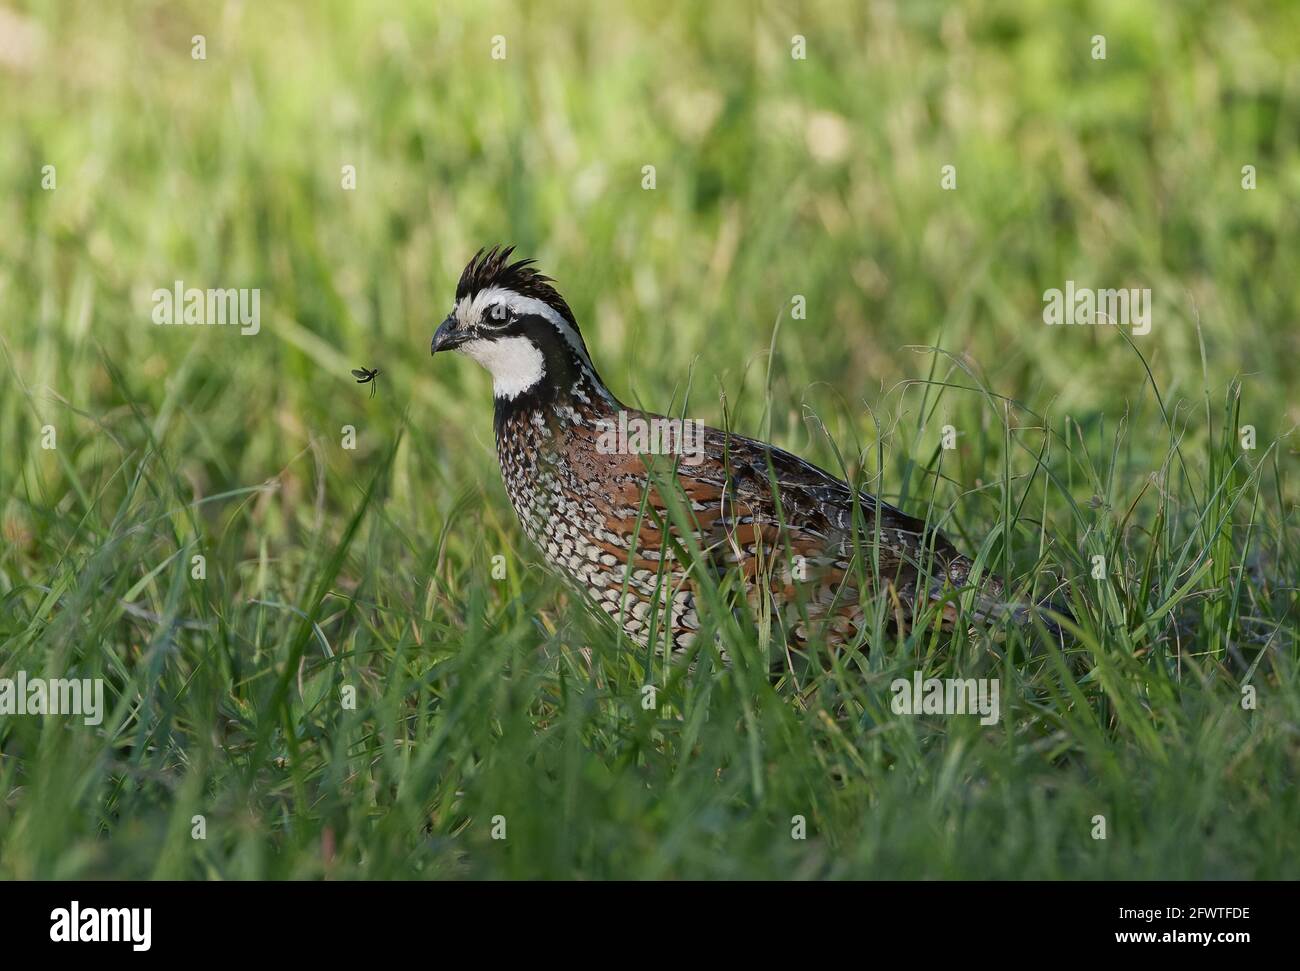 male northern bobwhite quail (Colinus virginianus) in grass with a love bug flying in front of its face Stock Photo